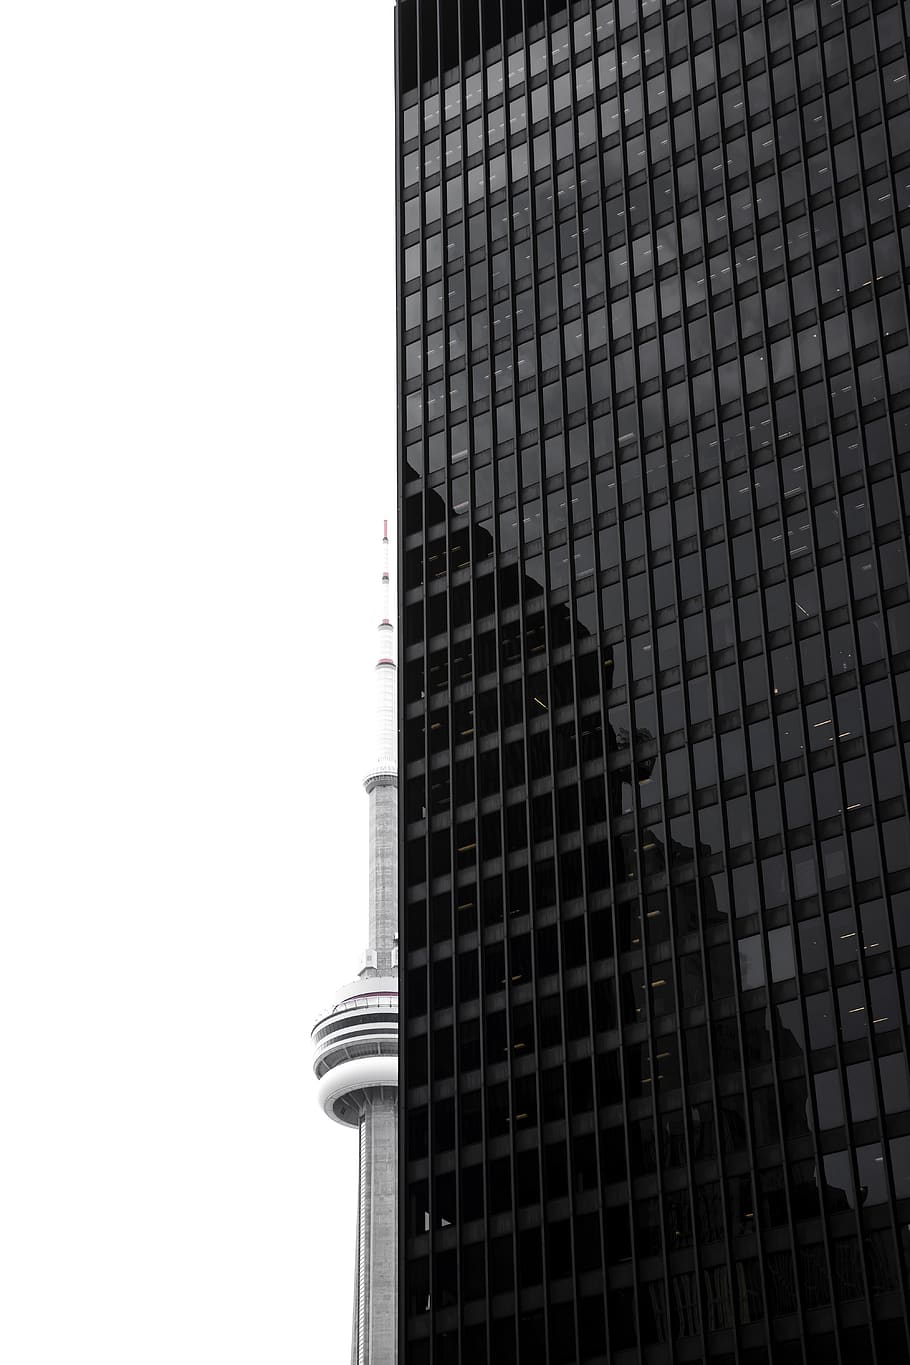 architecture, building, infrastructure, skyscraper, tower, black and white, building exterior, built structure, low angle view, city